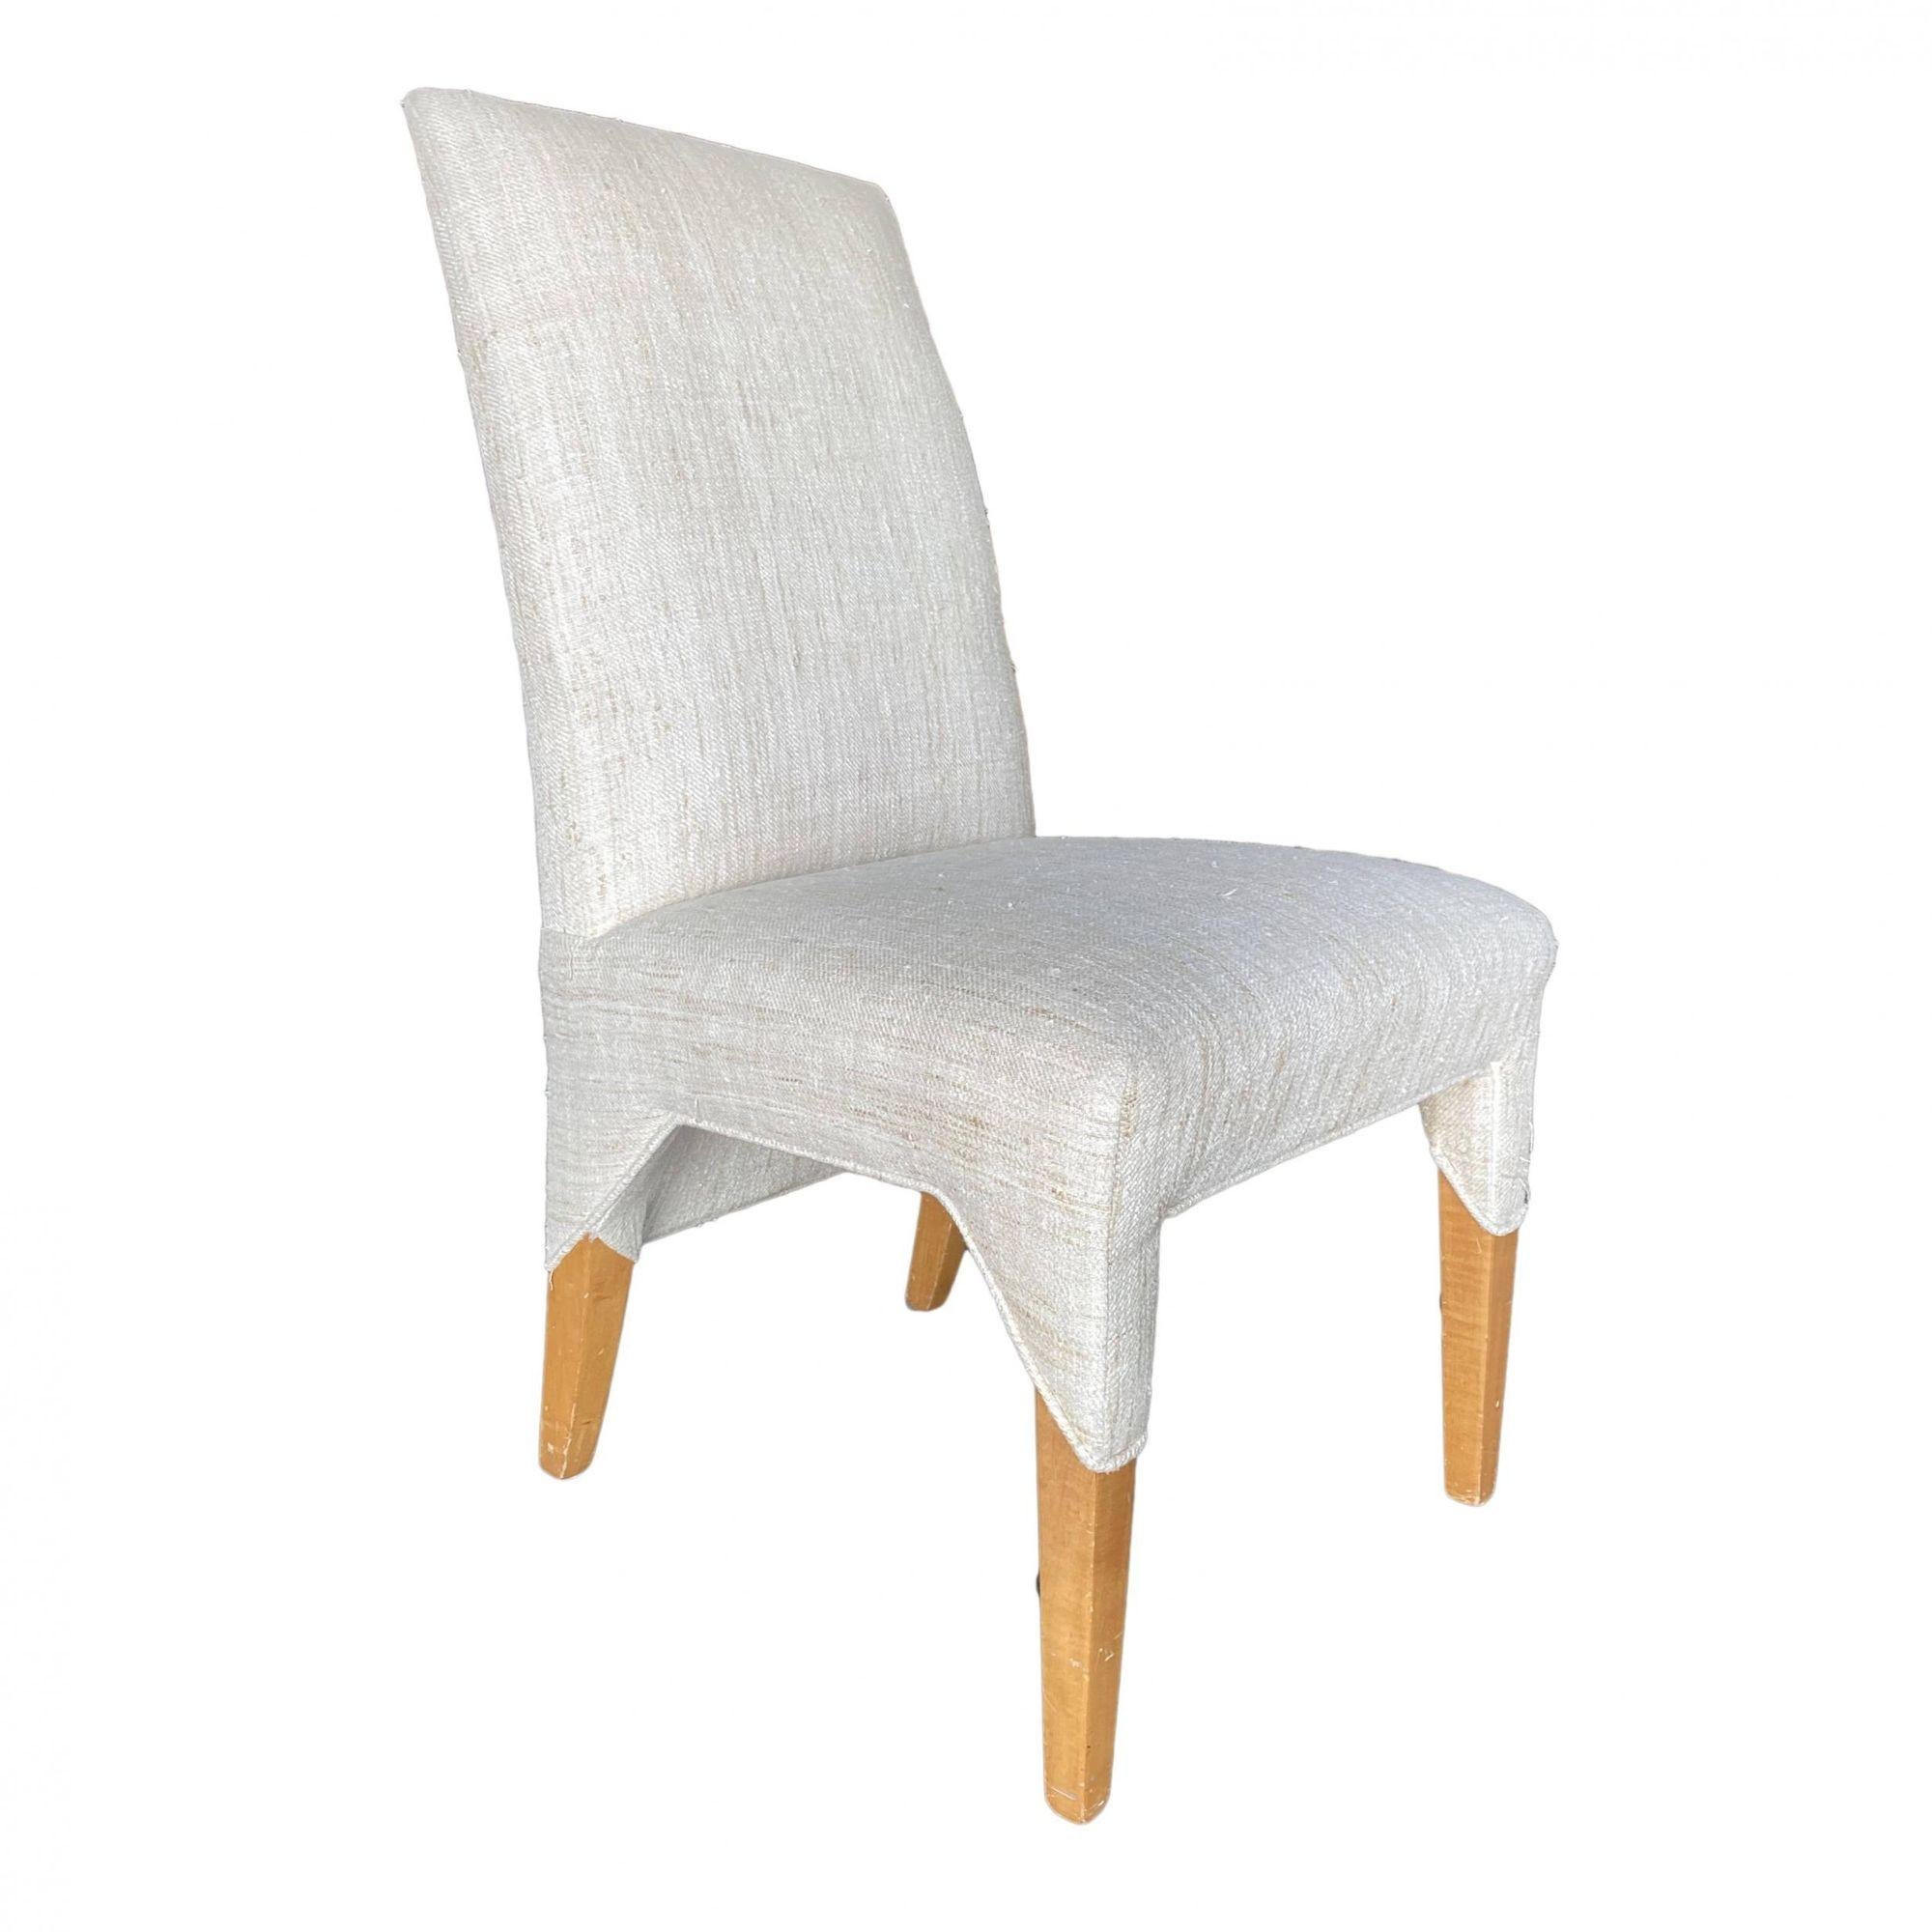 High style Post-modern dining chair featuring a set of 10 chairs featuring 3 captains each with armrests and 7 side chairs.

Armchair- Height: 42 in. X Width: 23 in. X Depth: 23 in. X Seat Height: 19 in.
Sidechair- Height: 42 in. X Width: 21 in. X